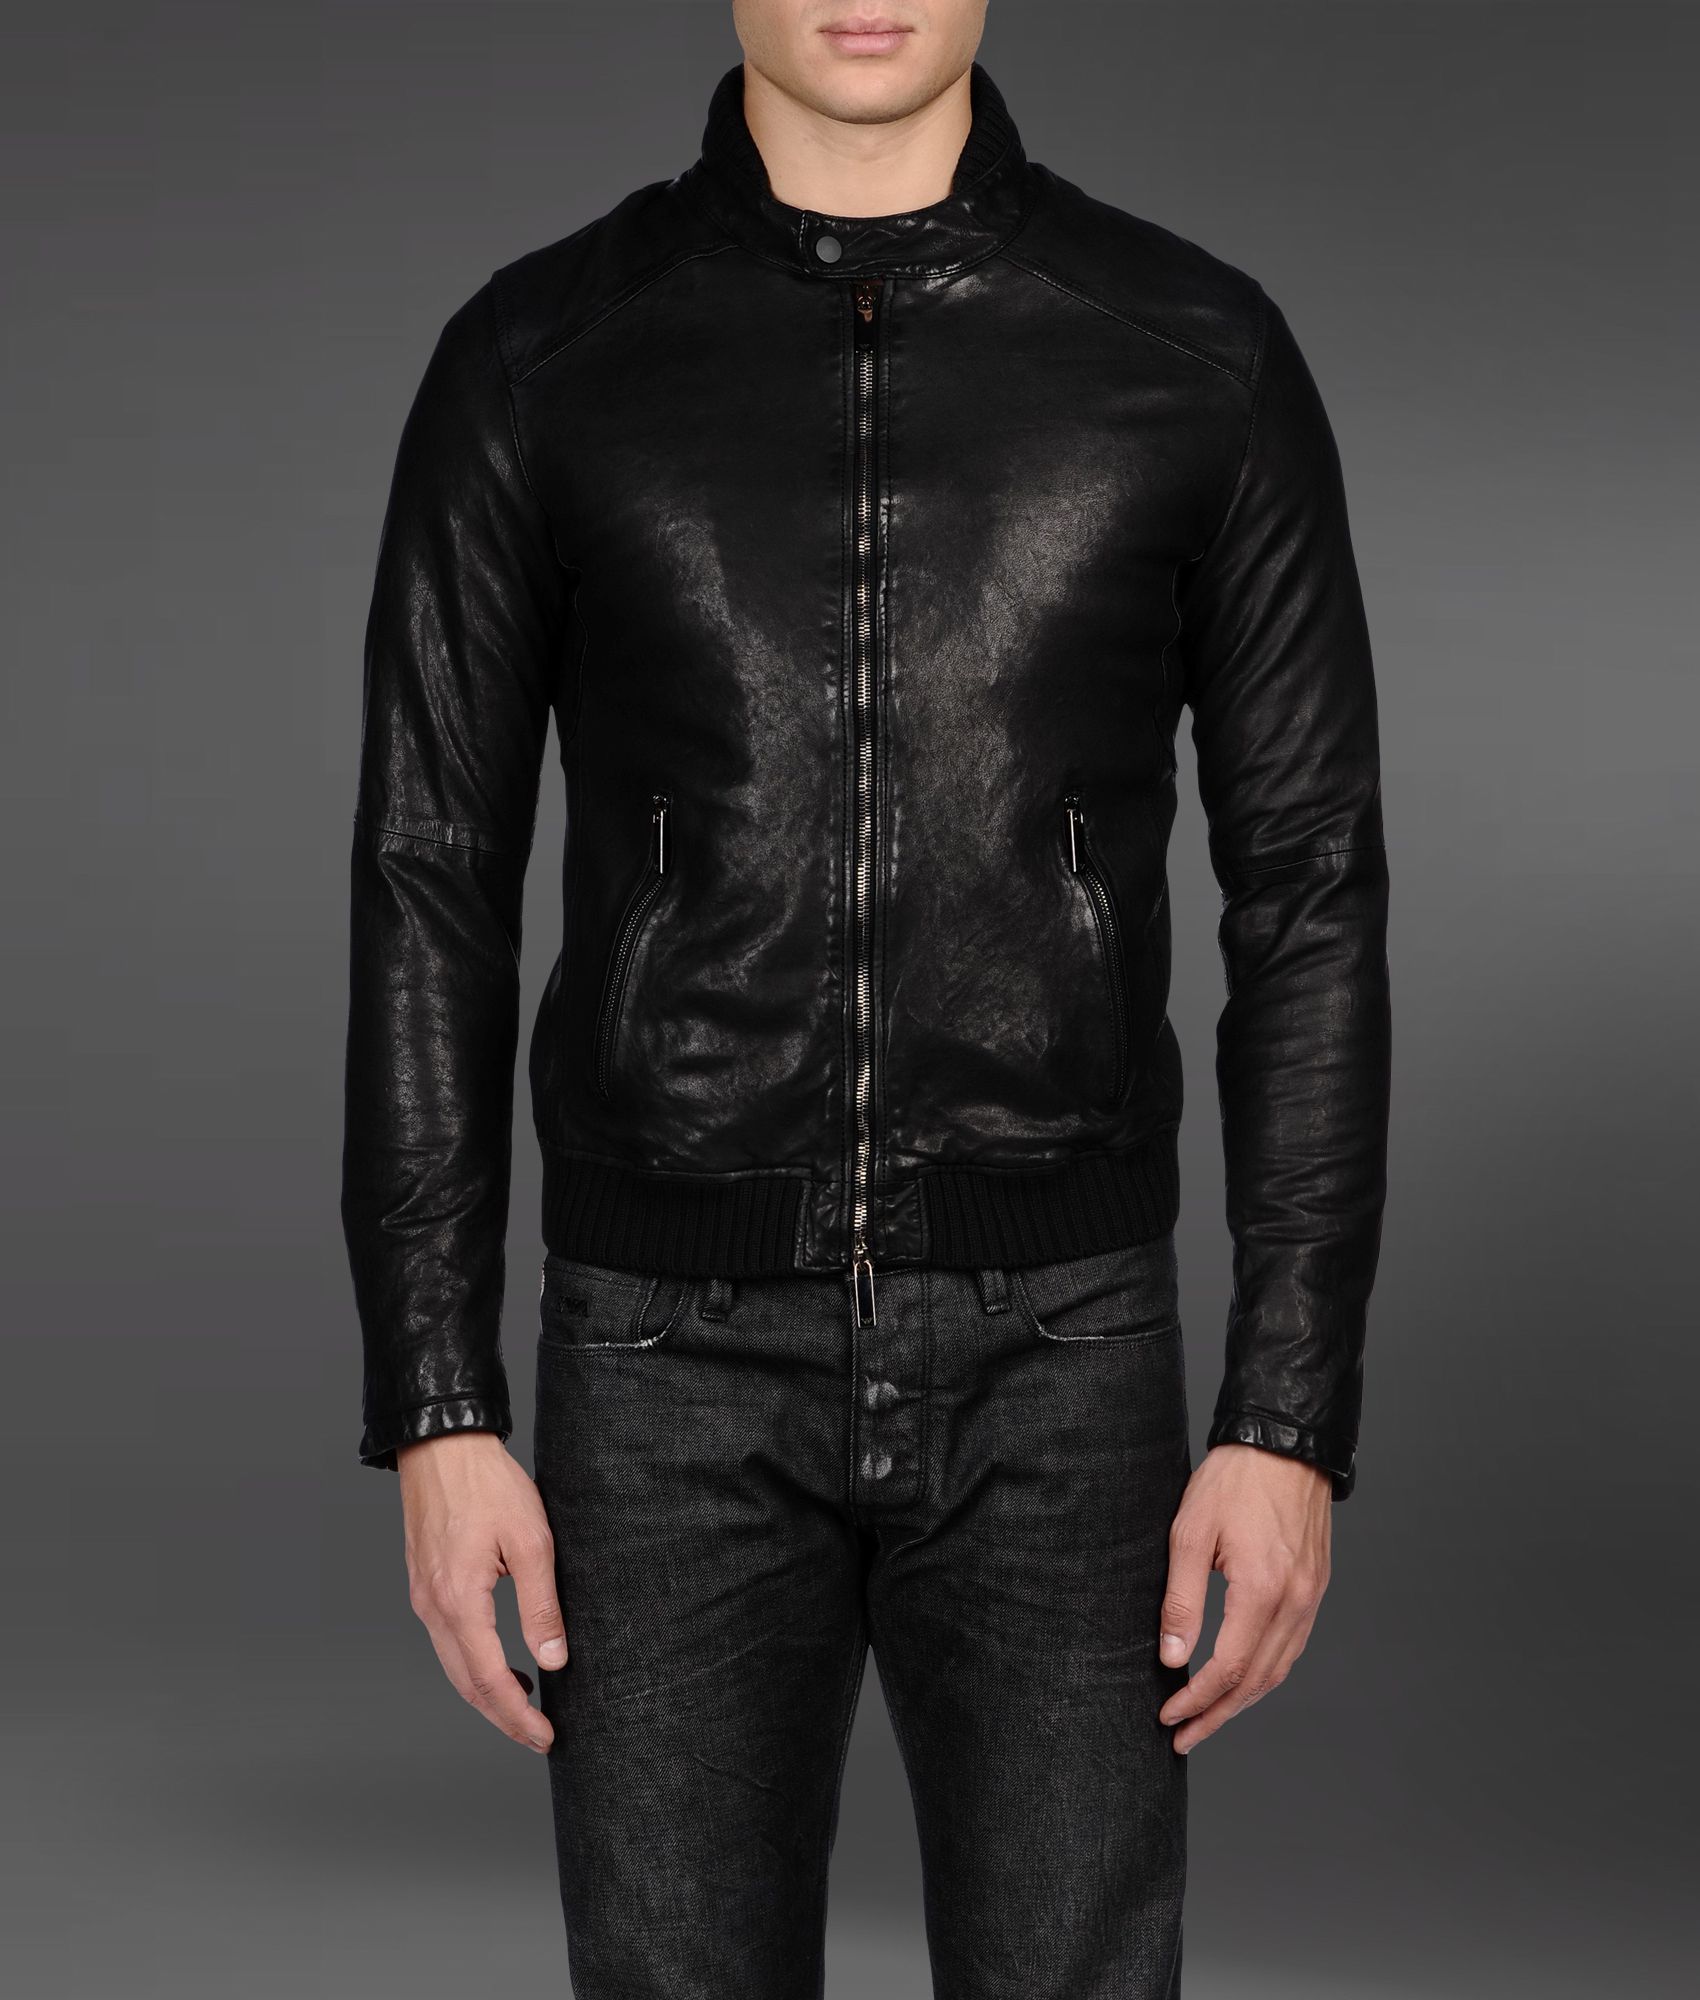 Lyst - Emporio Armani Biker Jacket with Leather Sleeves in Black for Men